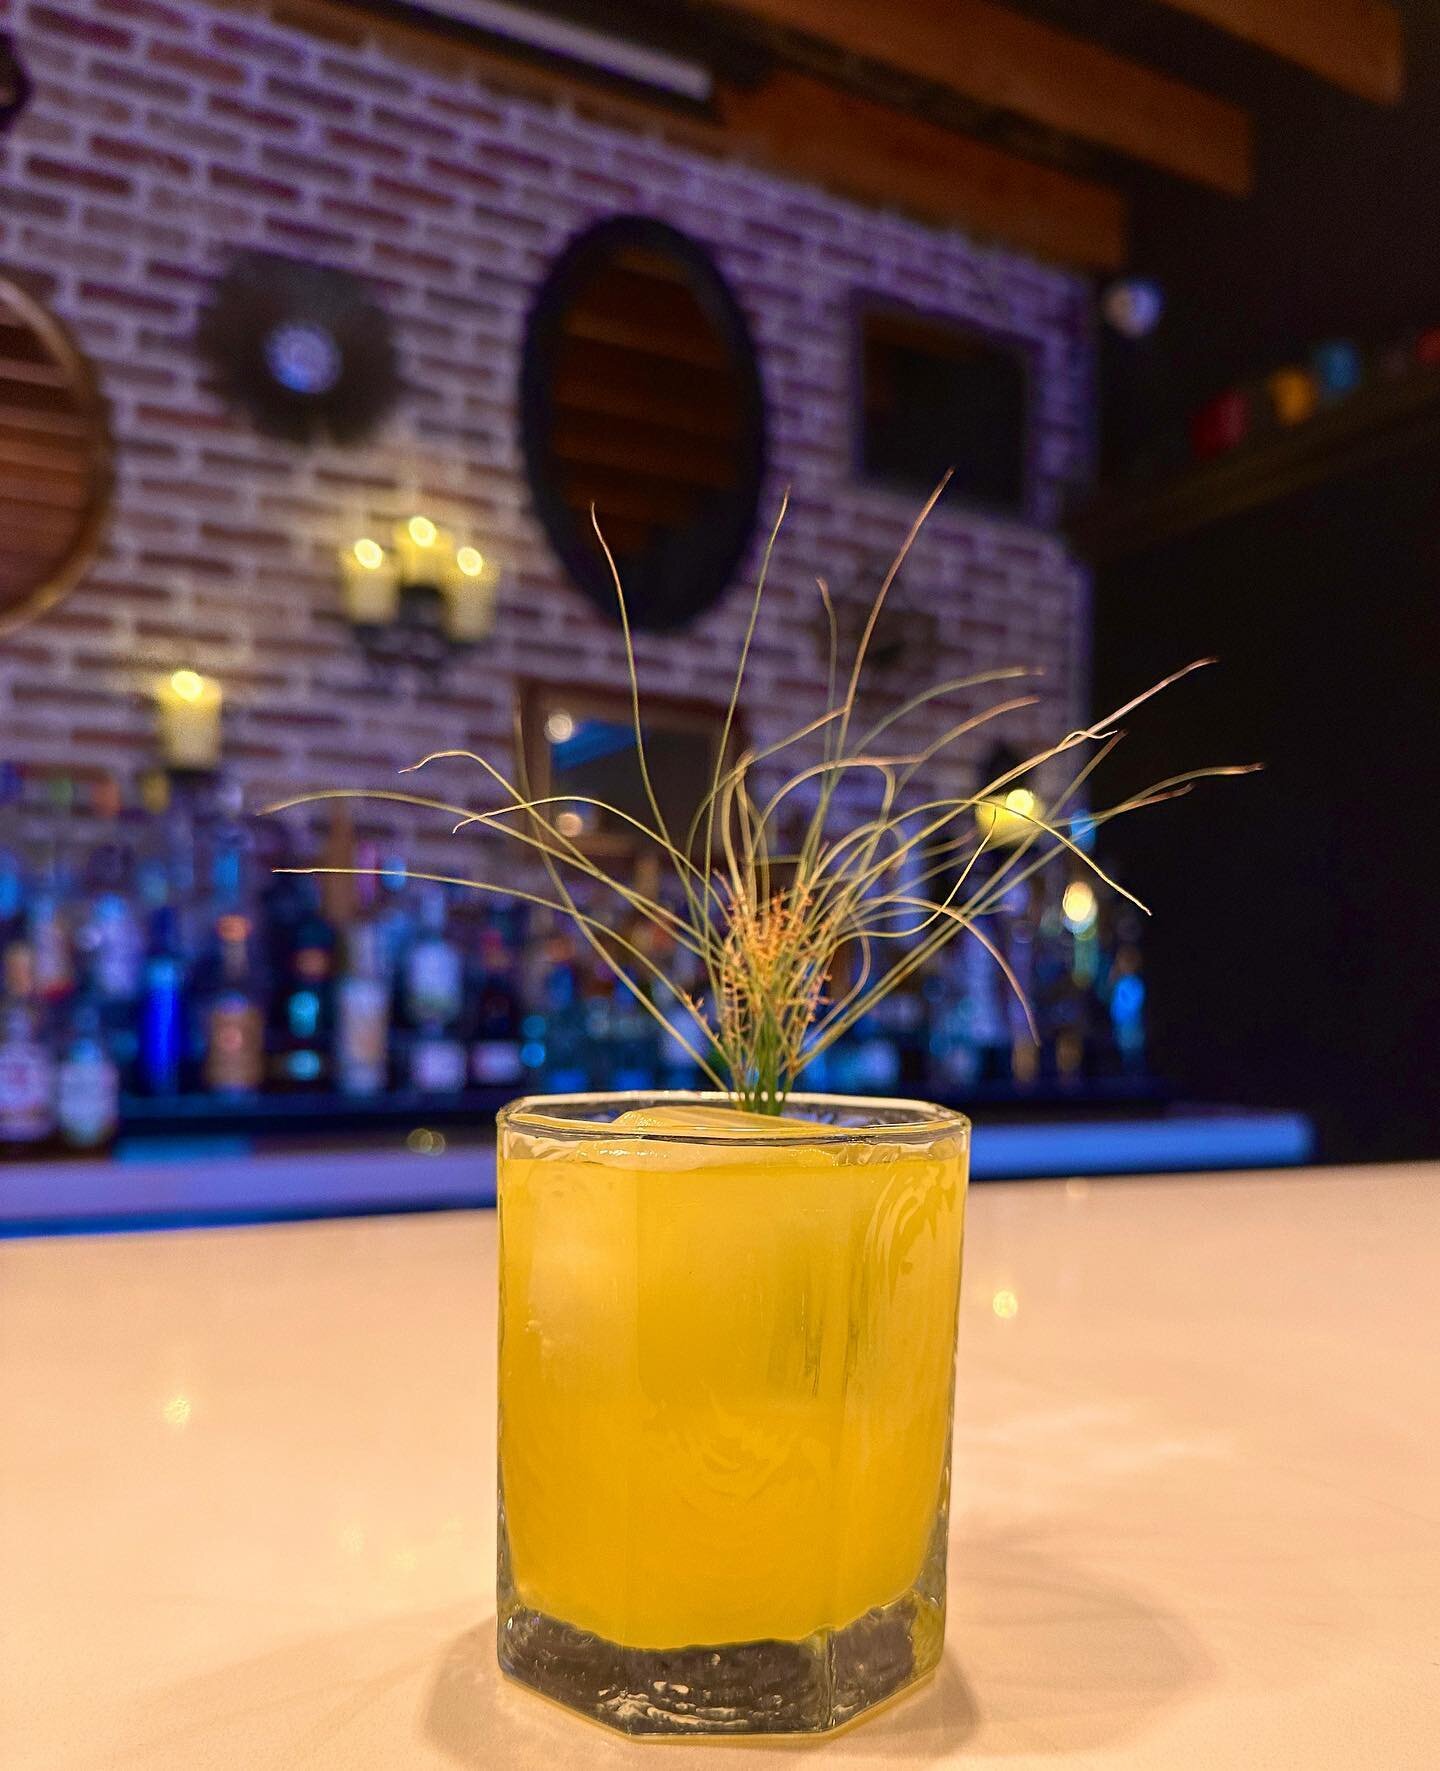 Smoke Pi&ntilde;a 
#northbrook #eataco #nextdoorlounge #bar #cocktails #trending #decor #design #yelp #chicago #lounge 

Come visit us at the new hot spot of Northshore Chicago. Connected with the top 25 Northshore restaurant EATACO